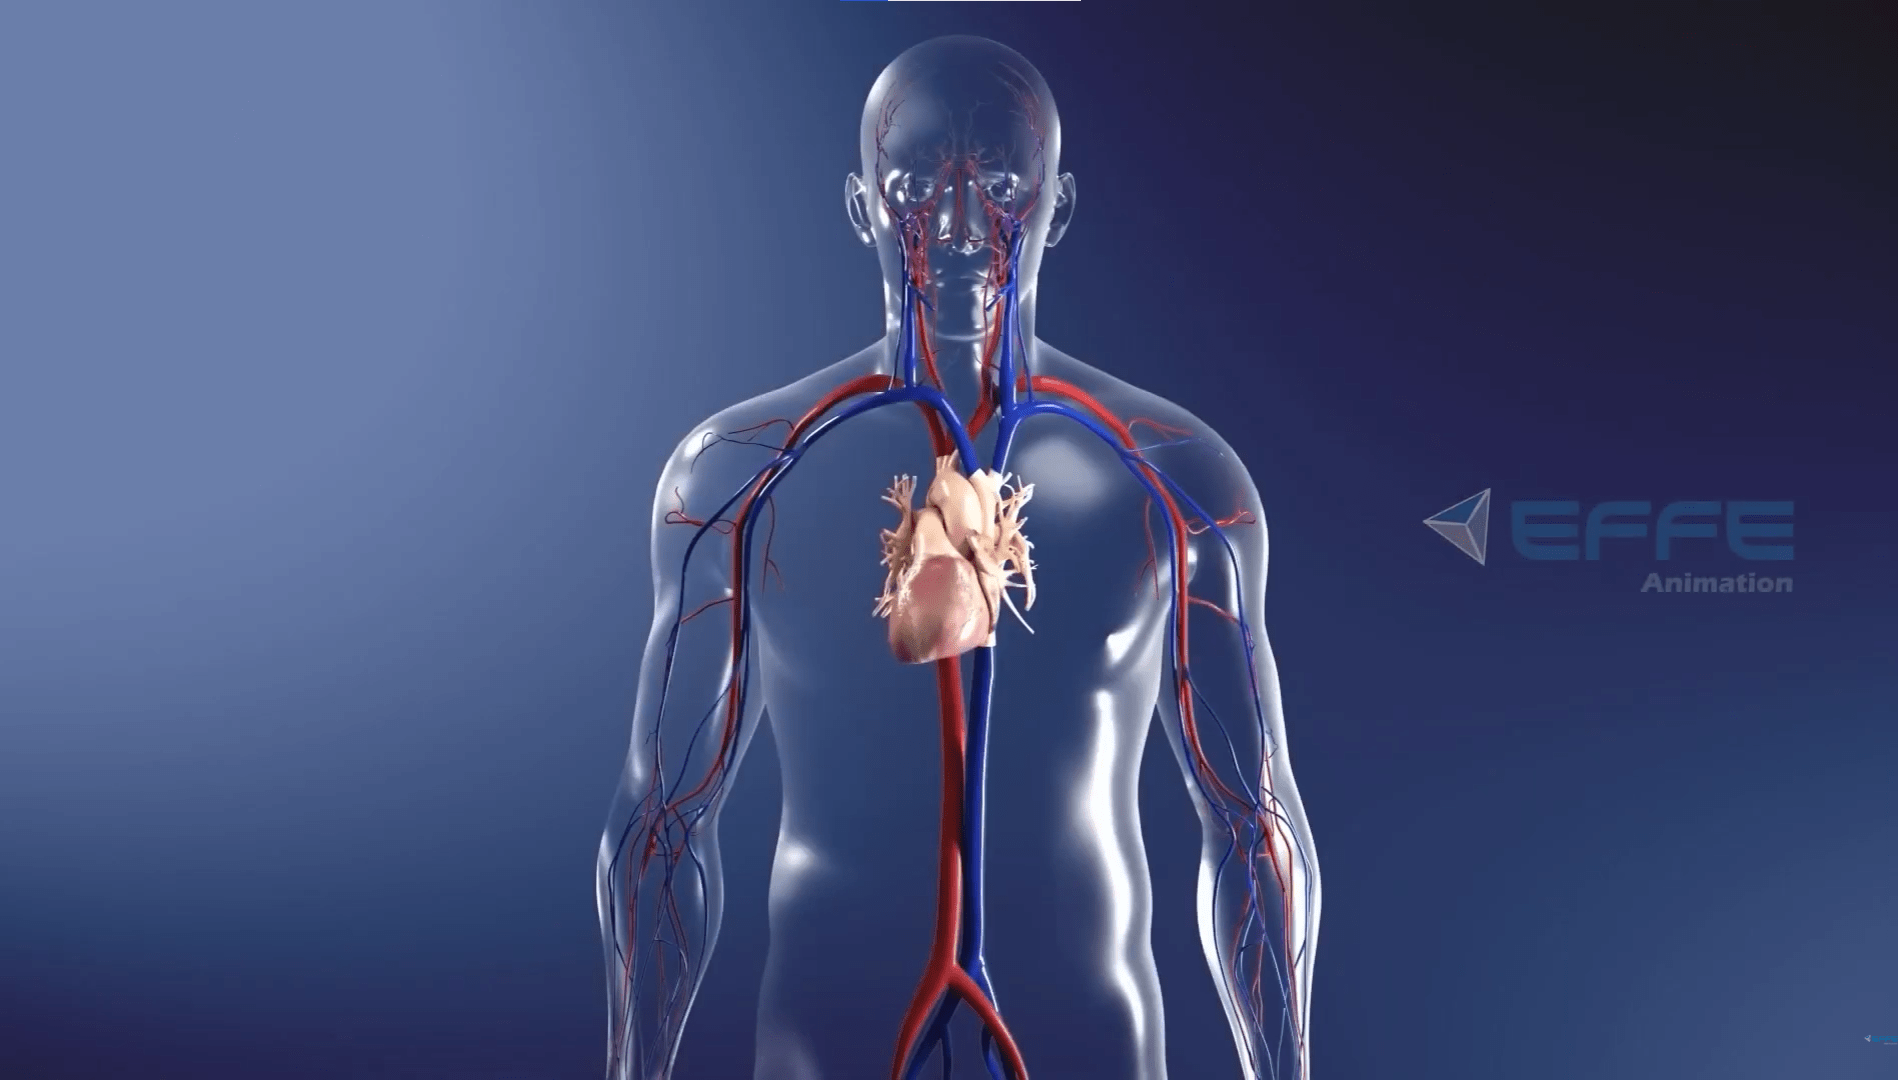 3D Animated Heart Treatment Video